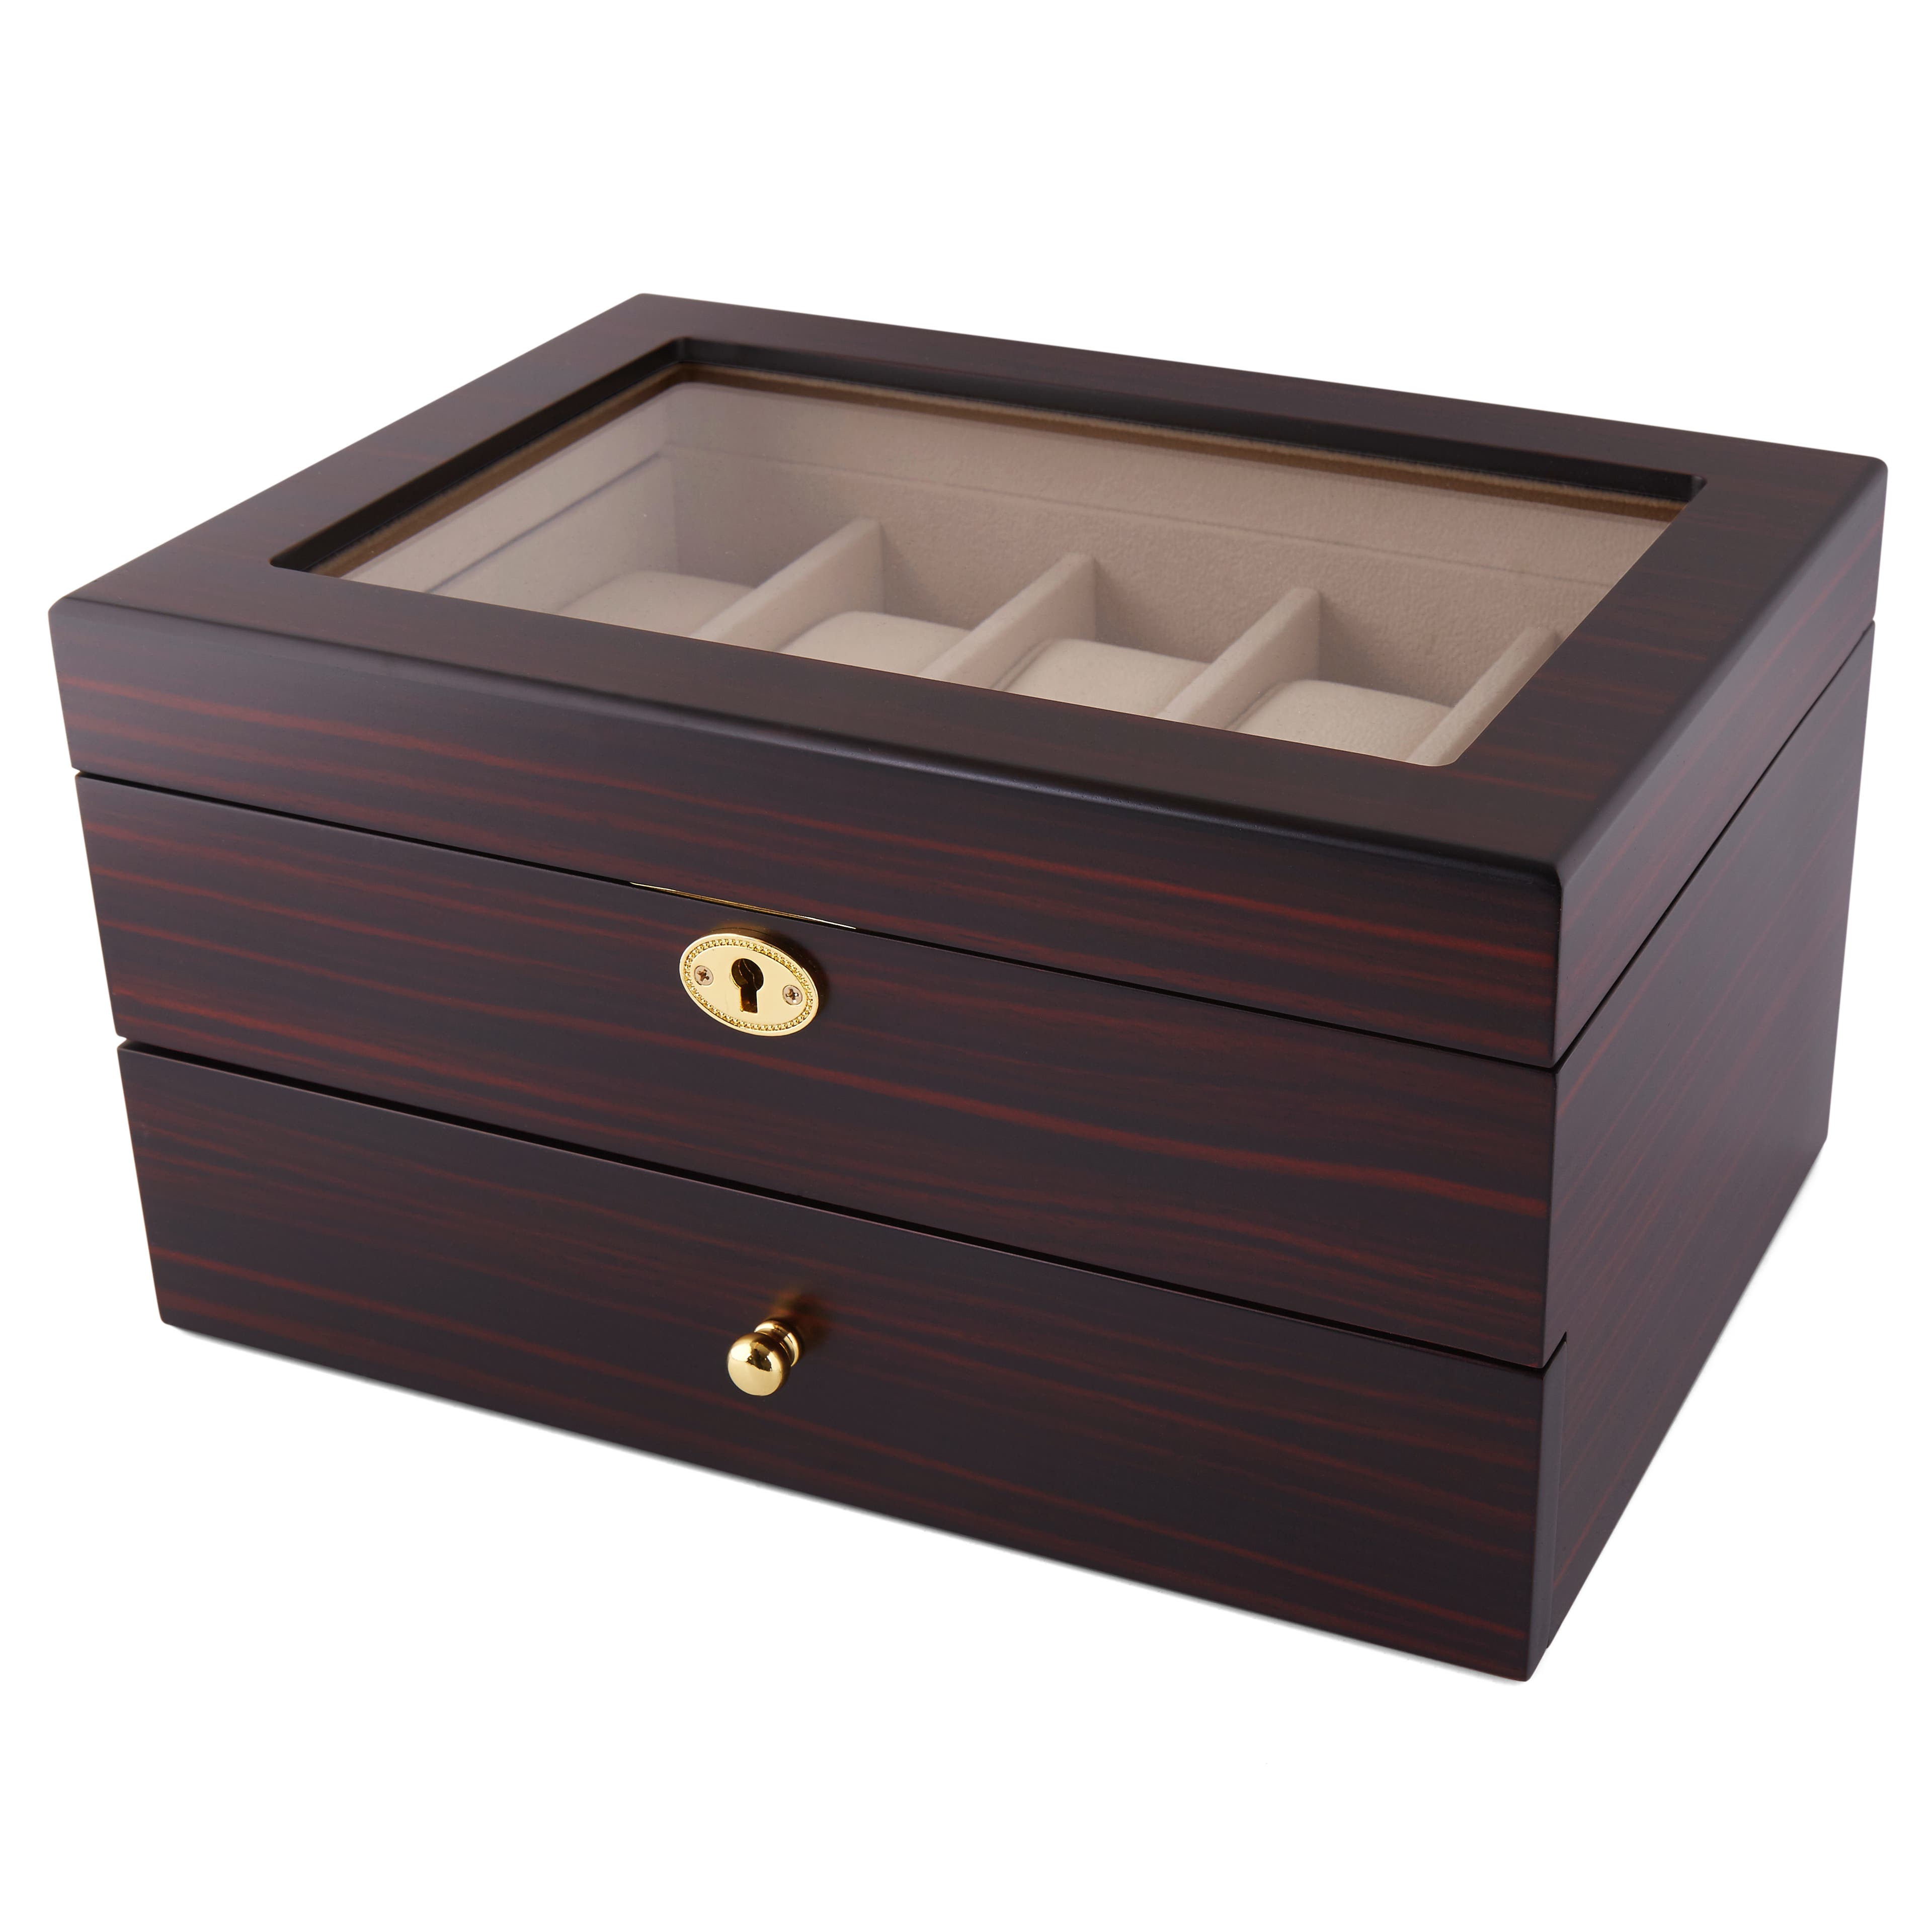 Two-Tier Gold-Tone Ebony Wood Watch Case - 20 Watches